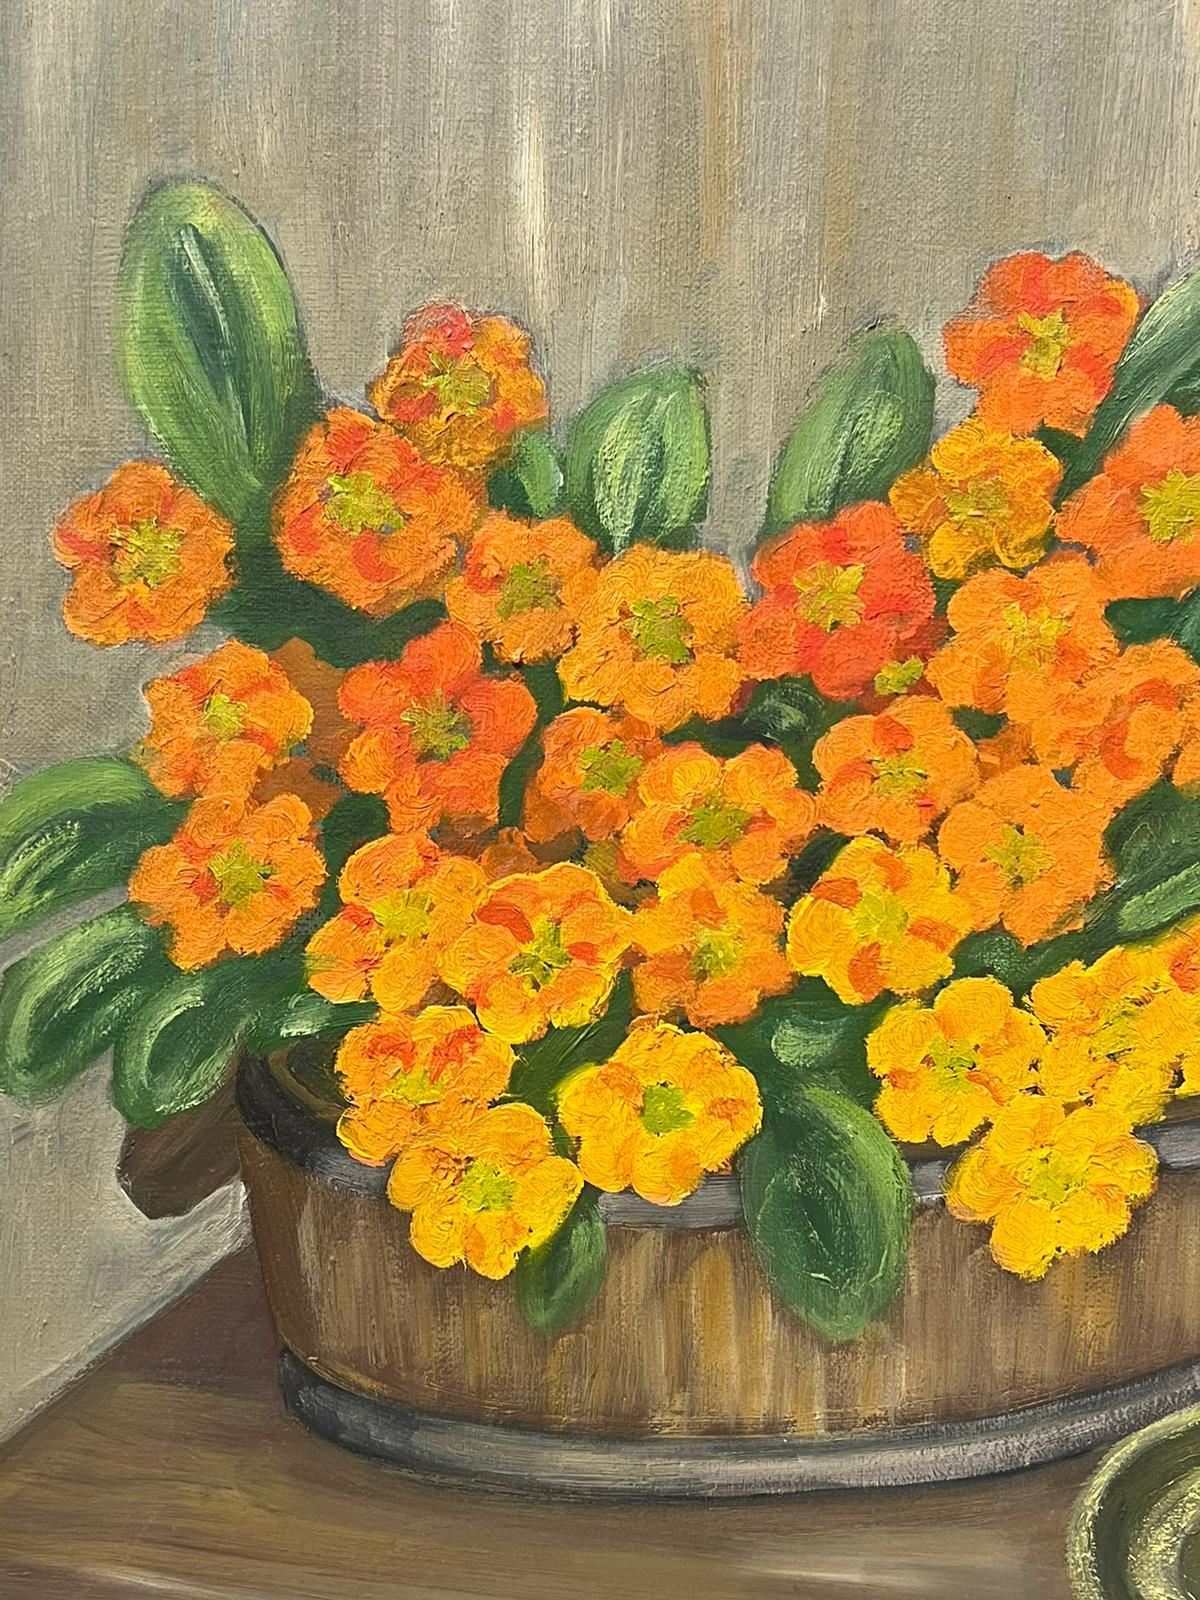 Mid 20th Century French Oil Painting Orange Pansies & Candle Table Interior  For Sale 2